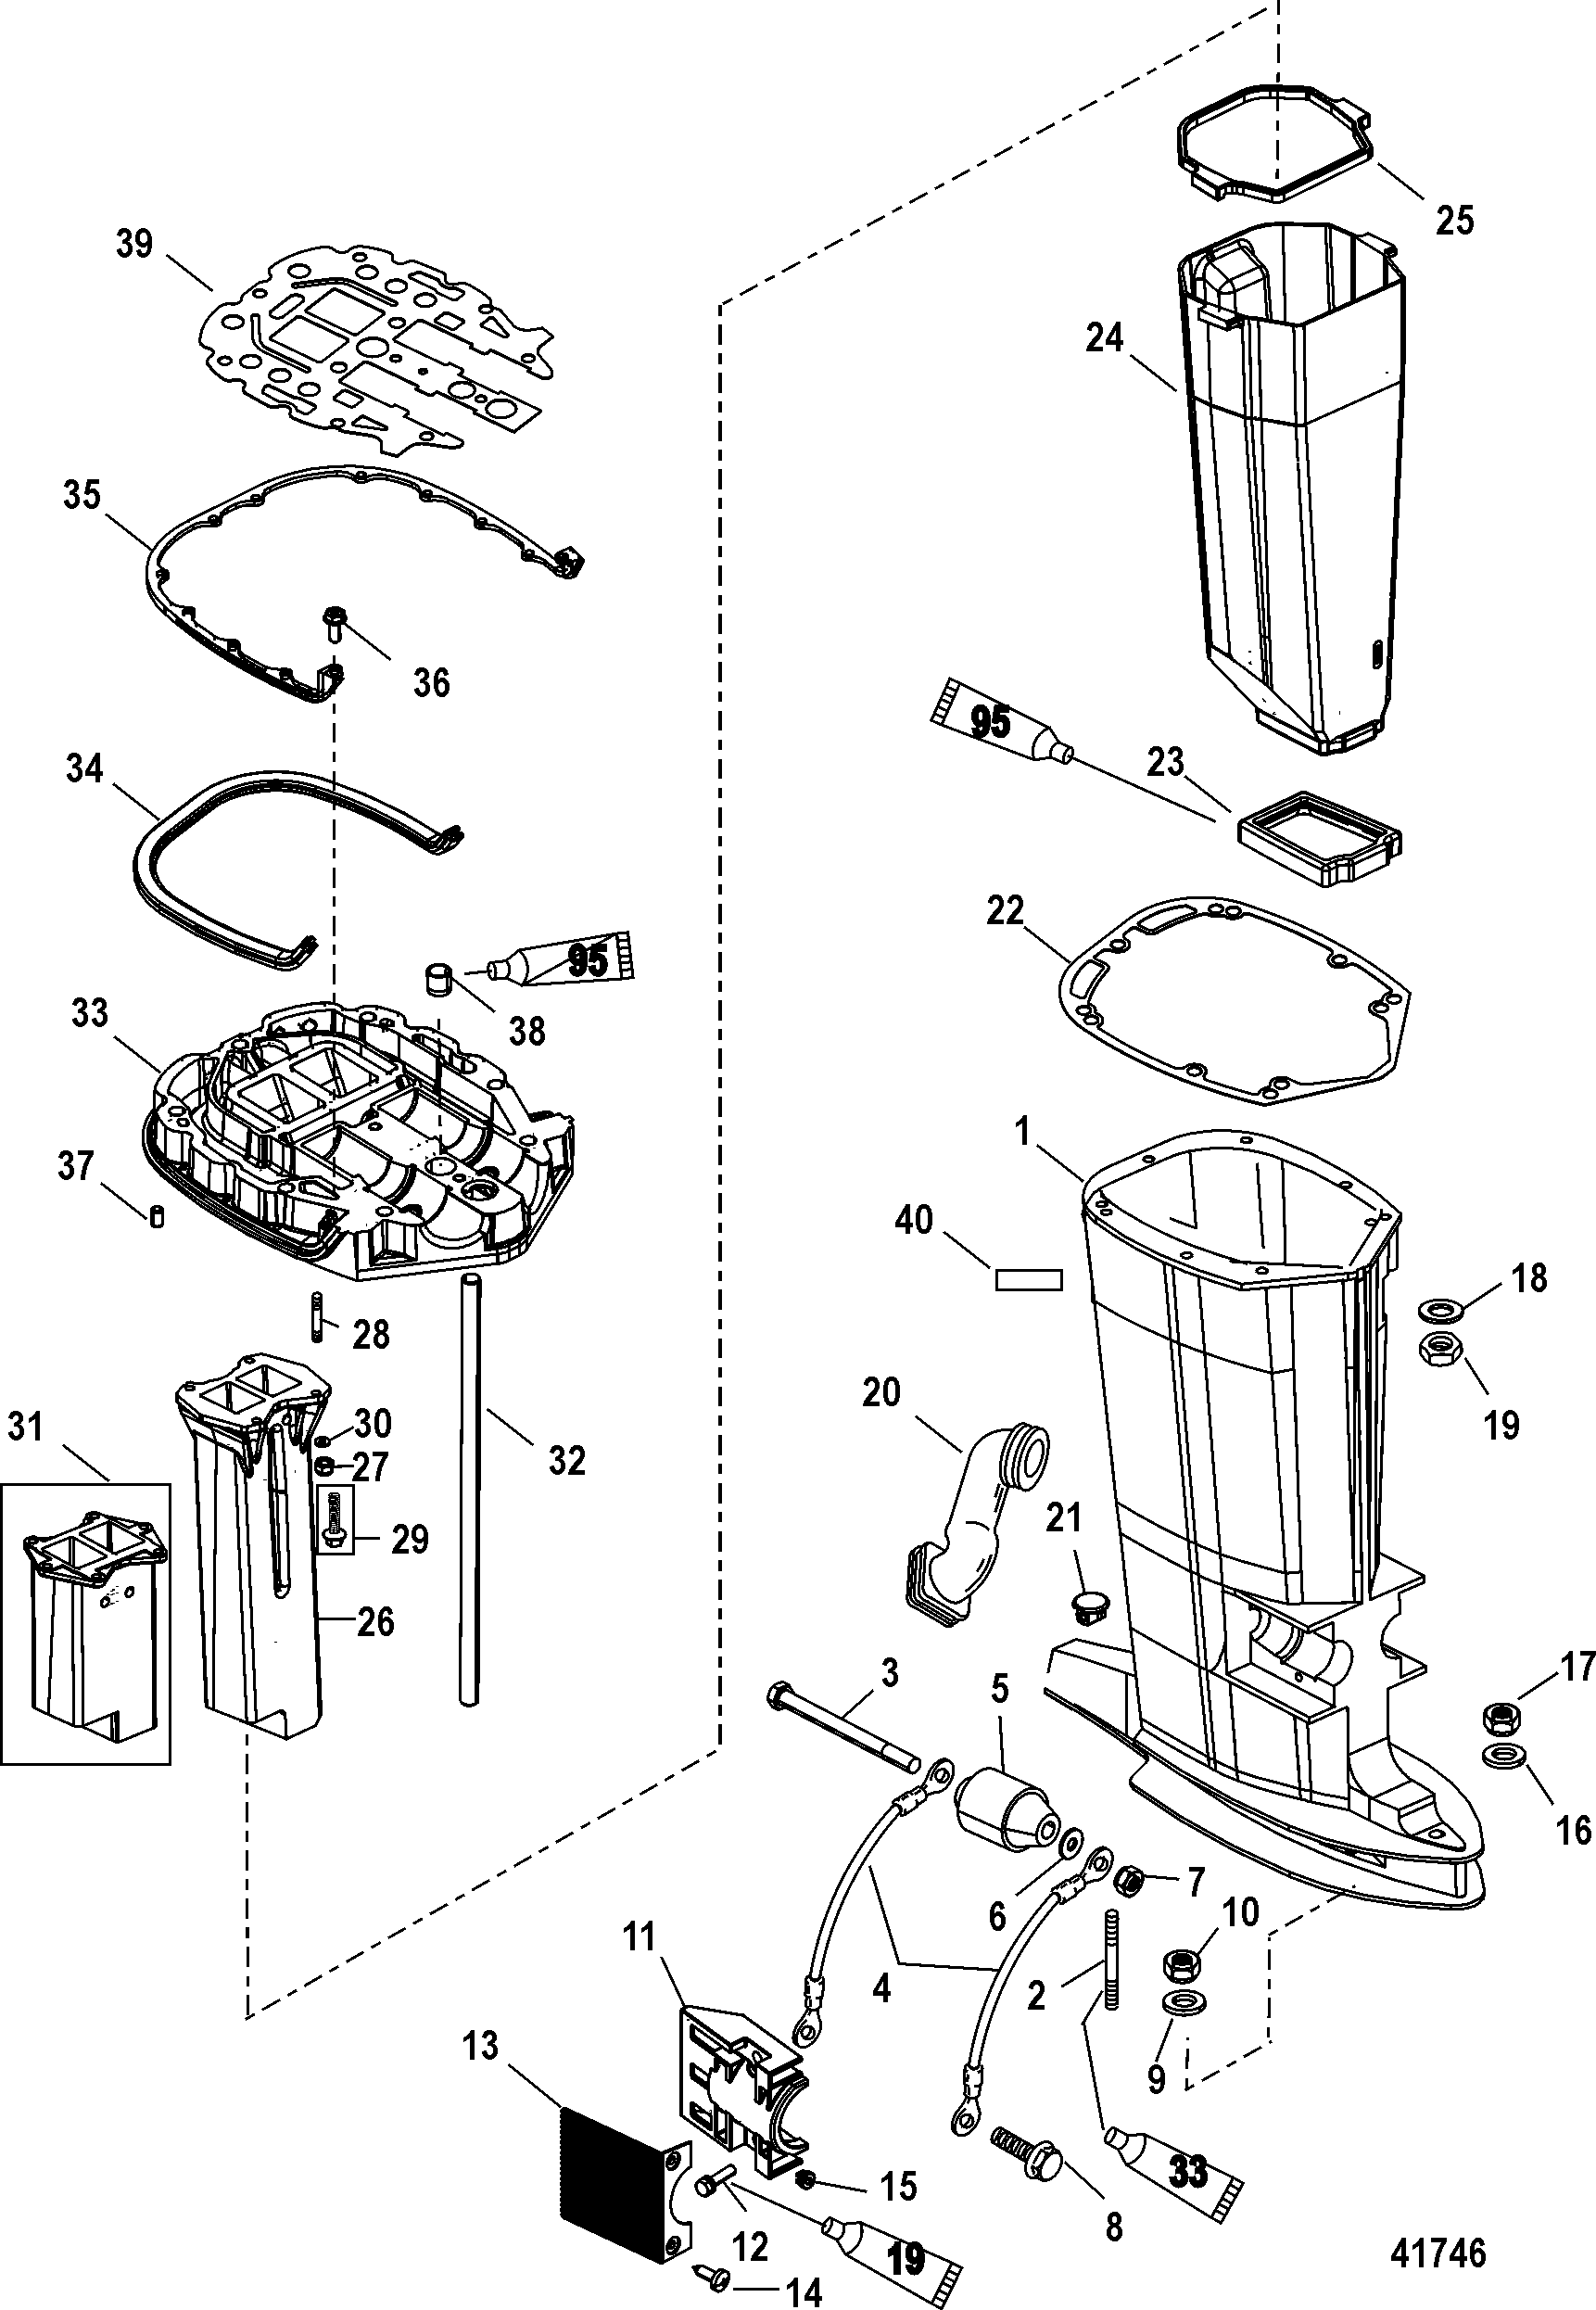 Driveshaft Housing and Exhaust Tube